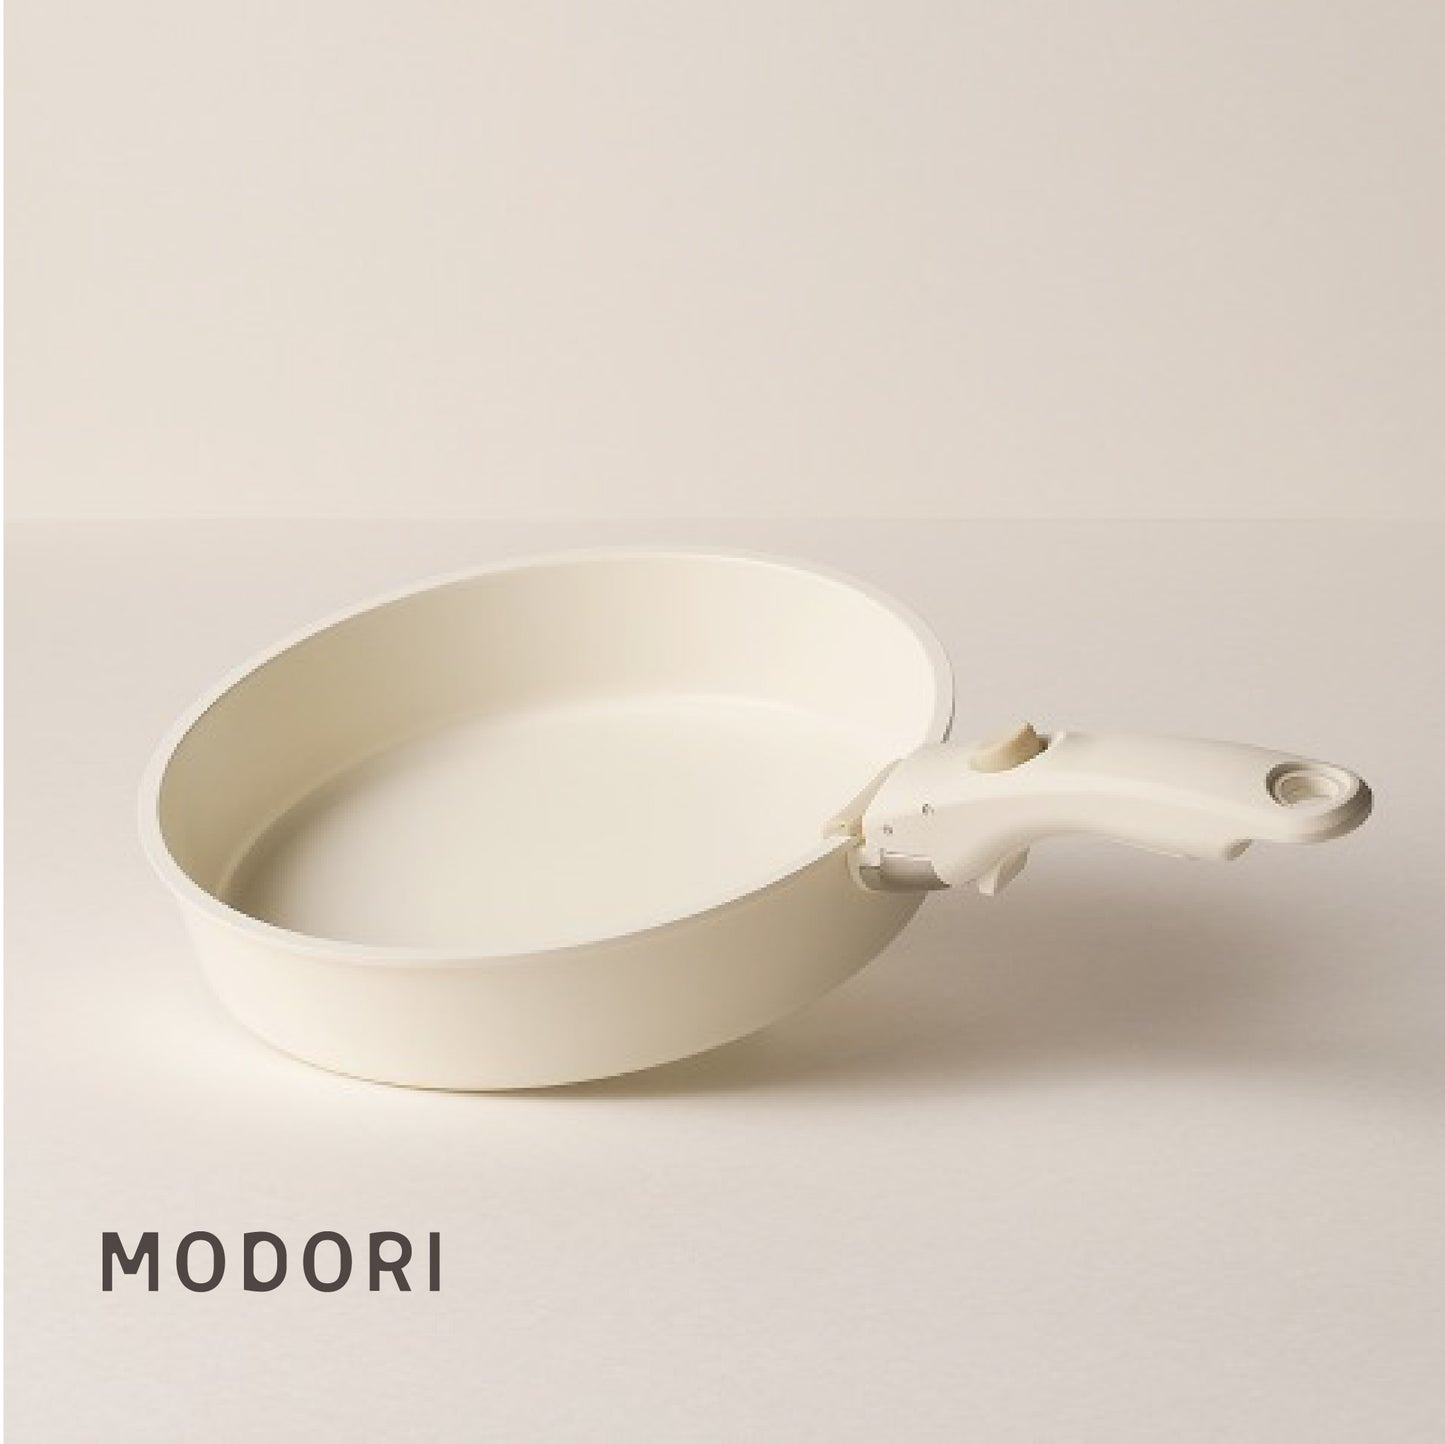 Modori Sodam Cookware Removable handle designed for use with sodam cookware. The Modori sodam cookware collection comes with removable handles, this stackable cookware set saves space in your kitchen, practical design and minimalist colours fit into any kitchen. Modori is the key to designing your dream kitchen.